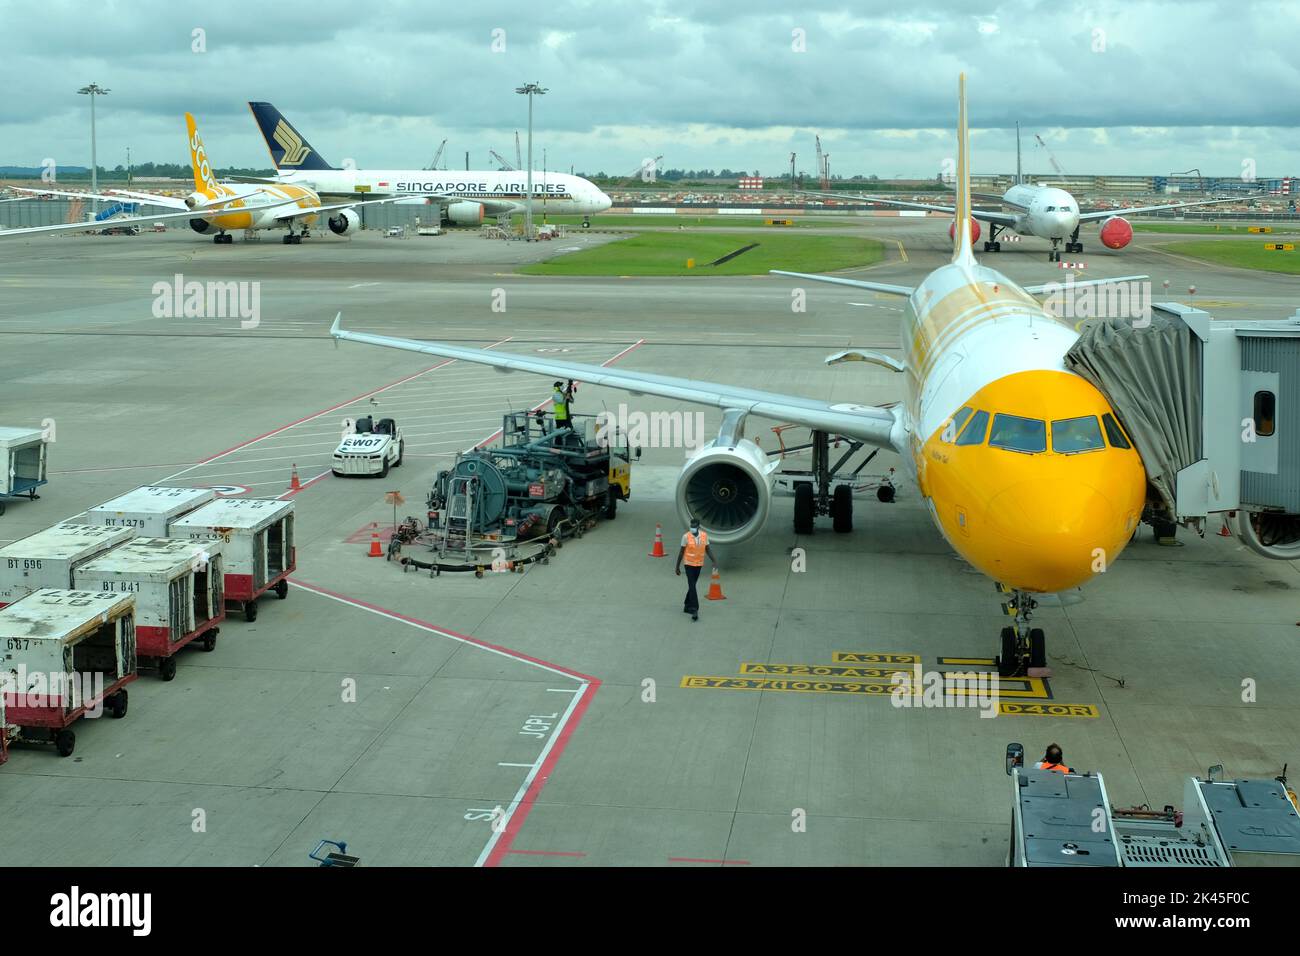 A Scoot aircraft on the gate at Changi airport, Singapore Stock Photo